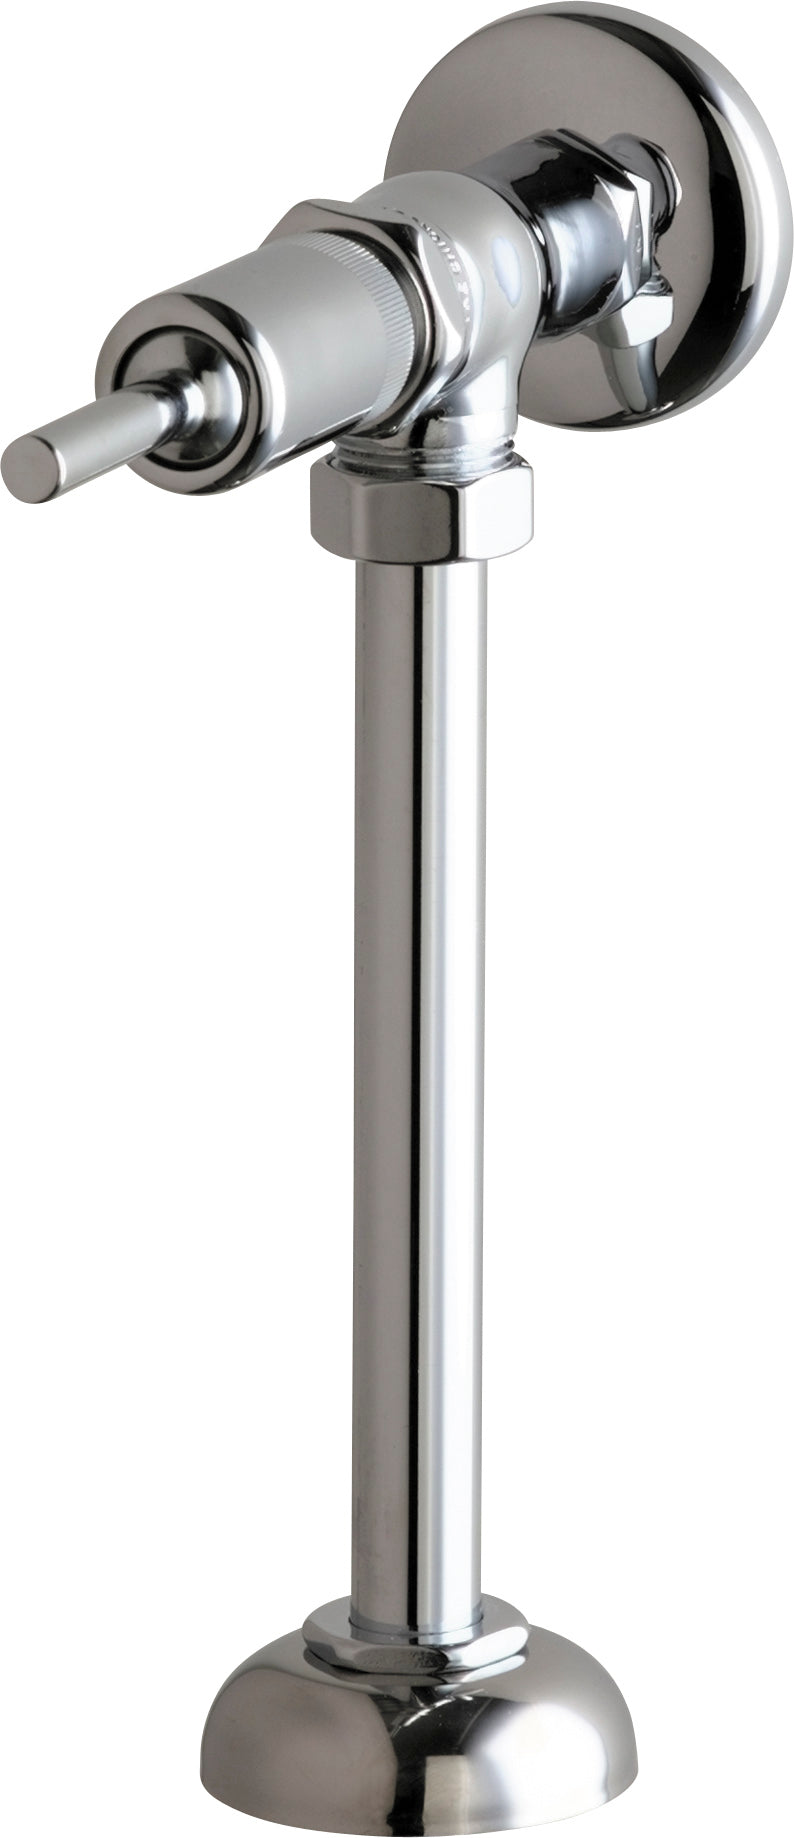 Chicago Faucets Urinal Valve 732-OHCP